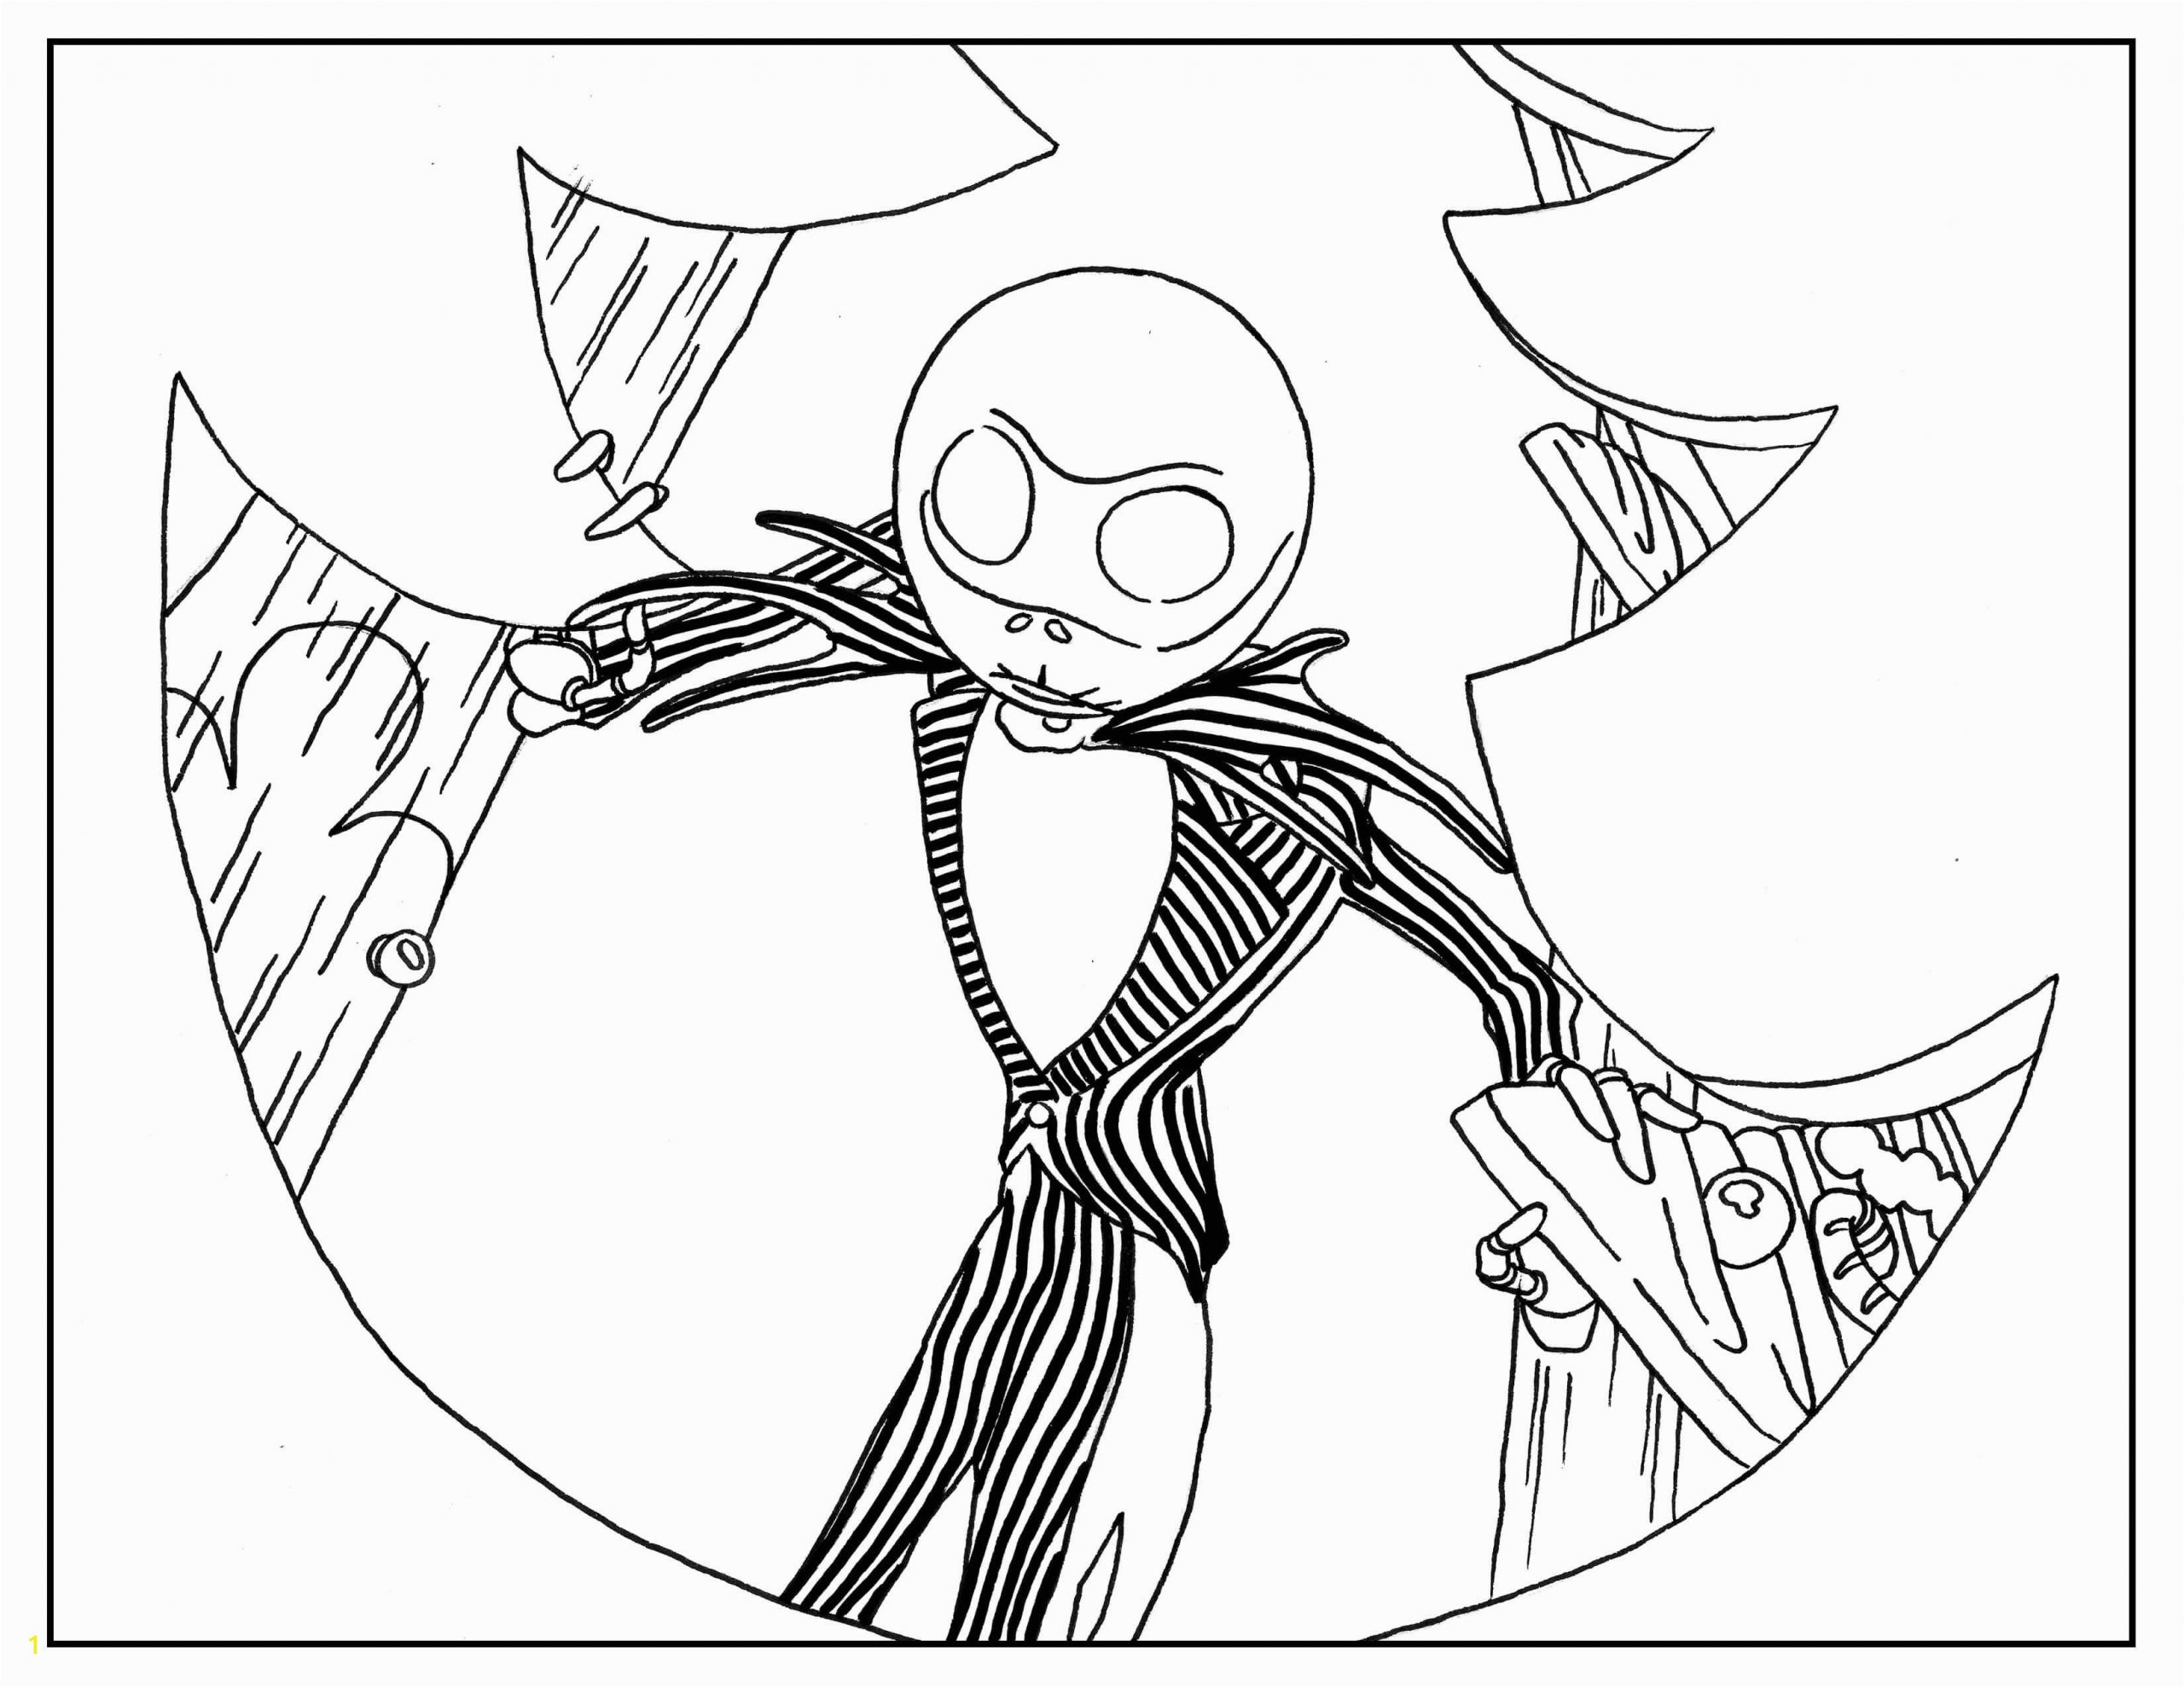 Nightmare before Christmas Adult Coloring Pages Free Printable Halloween Coloring Pages for Adults Best